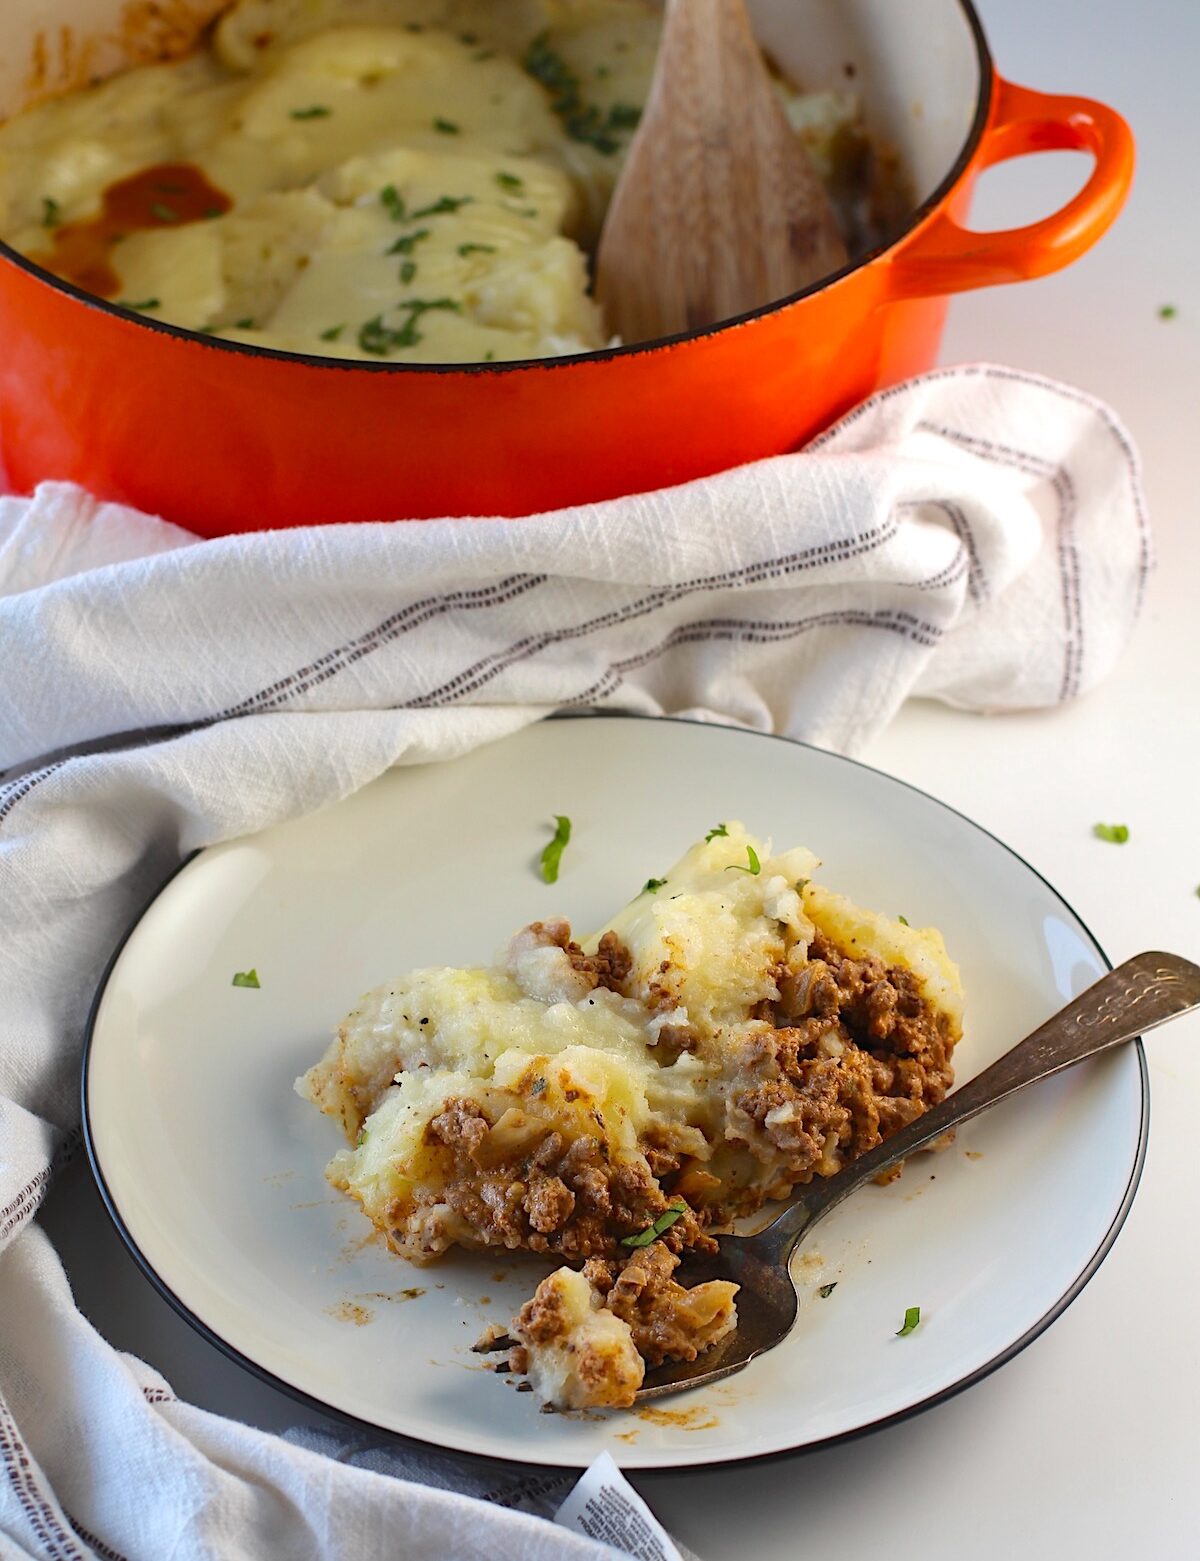 Piece of Dutch oven shepherd's pie with ground beef filling topped with mashed potatoes on a plate with fork laying down with a bite. Orange coated dutch oven with the shepherd's pie is in the background.